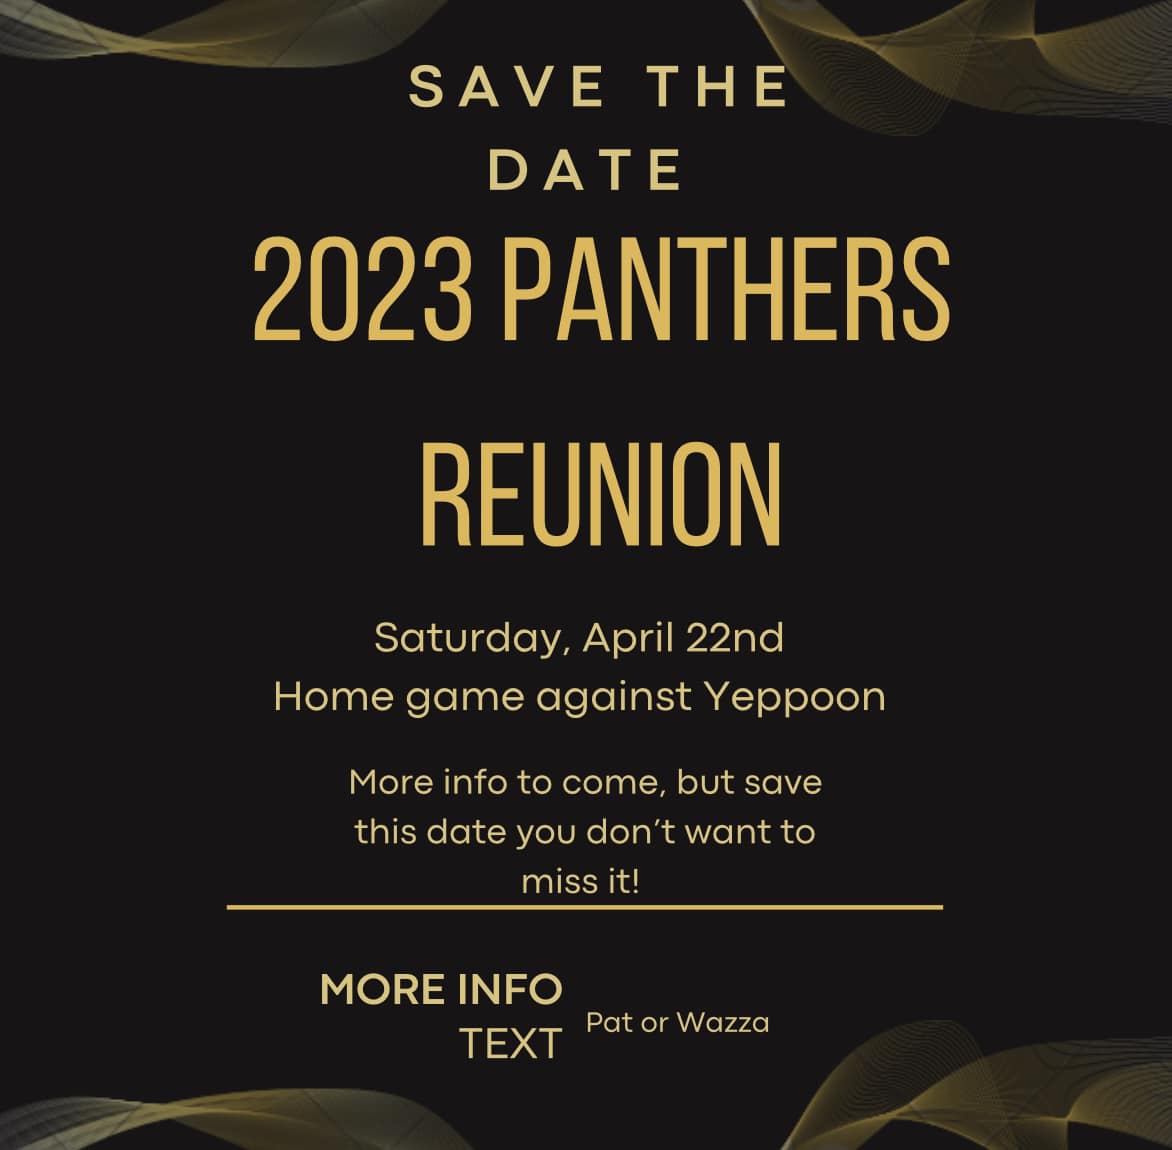 Save the Date - 2023 Panthers Reunion